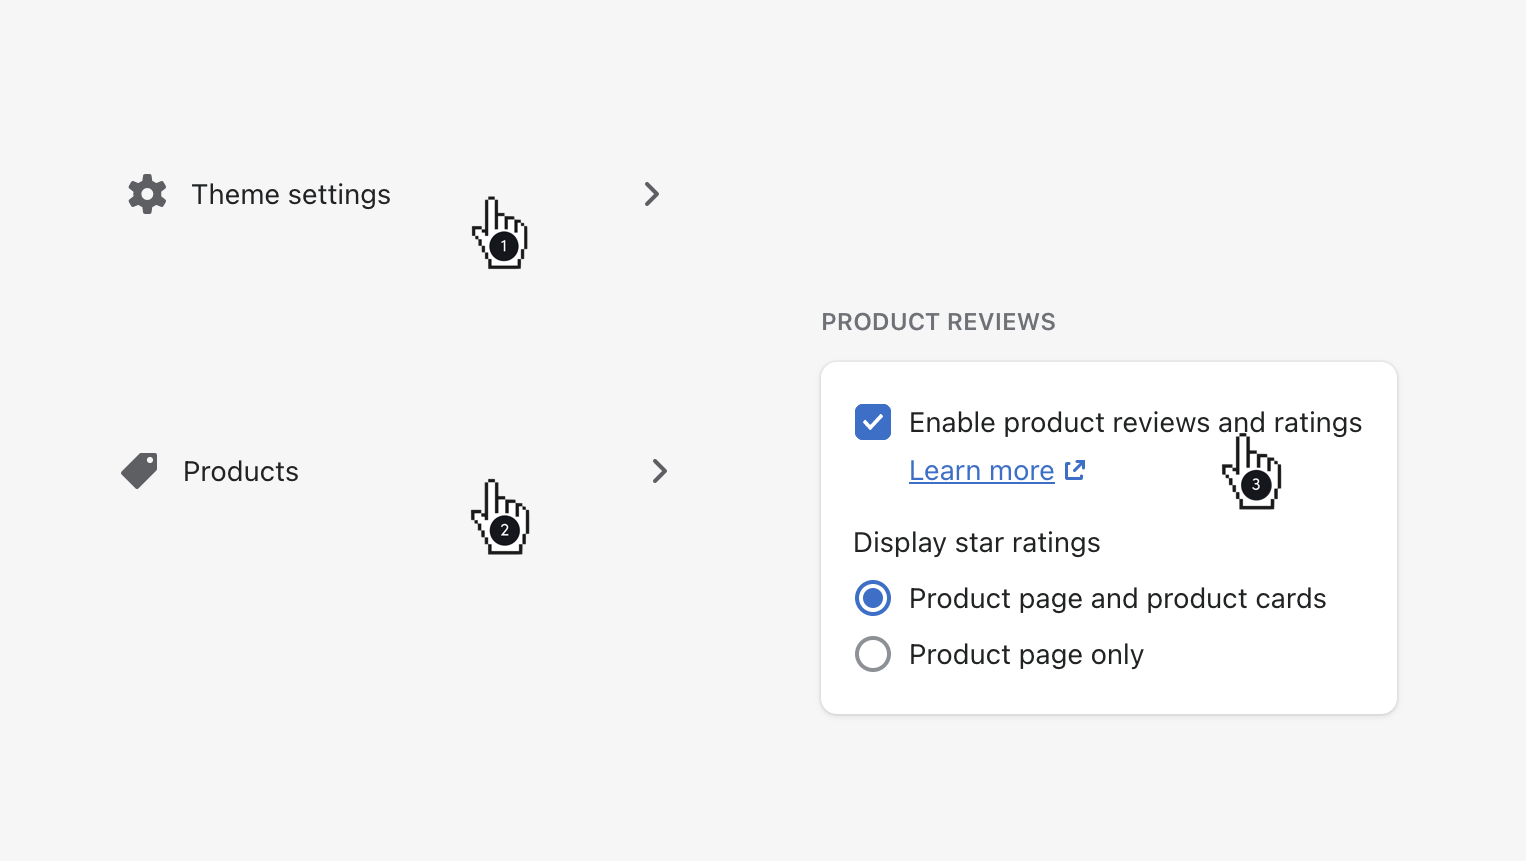 open_products_in_theme_settings_to_enable_product_reviews.png